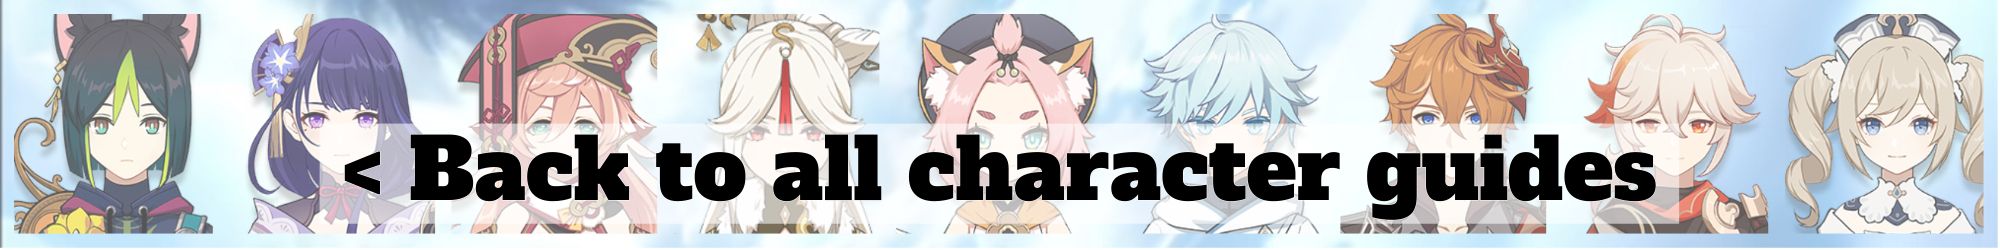 Link to character guide